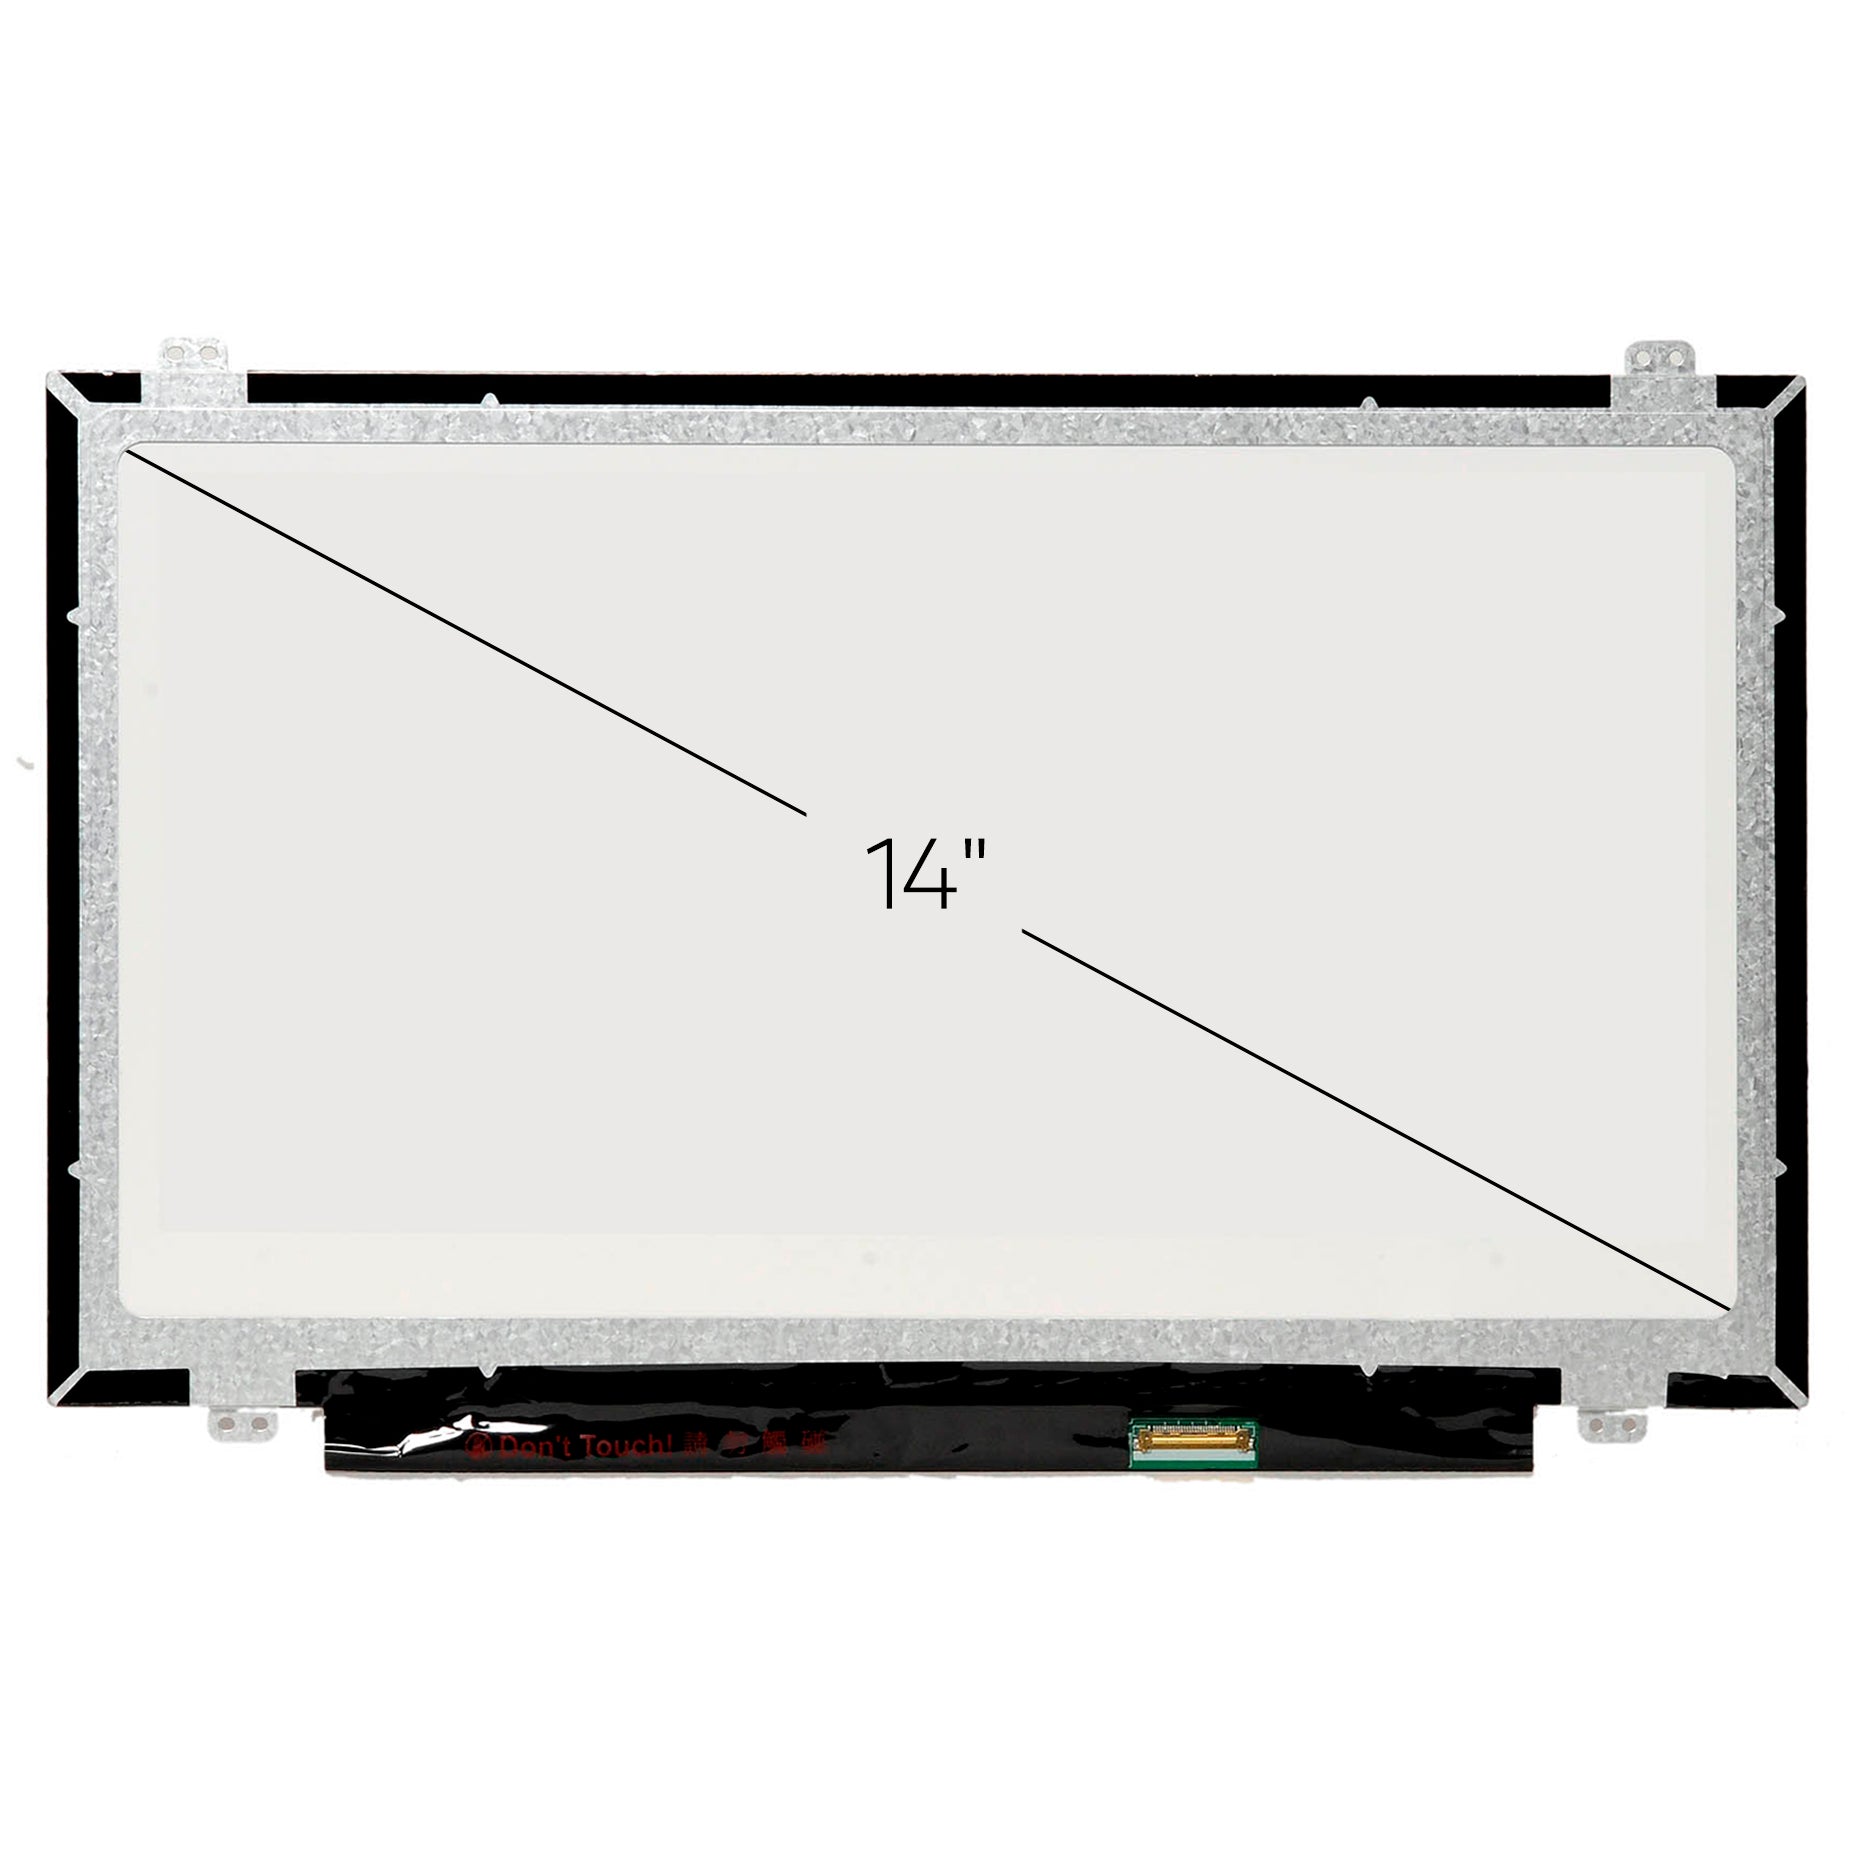 Screen Replacement for HP Chromebook 14-CA020NR HD 1366x768 Glossy LCD LED Display